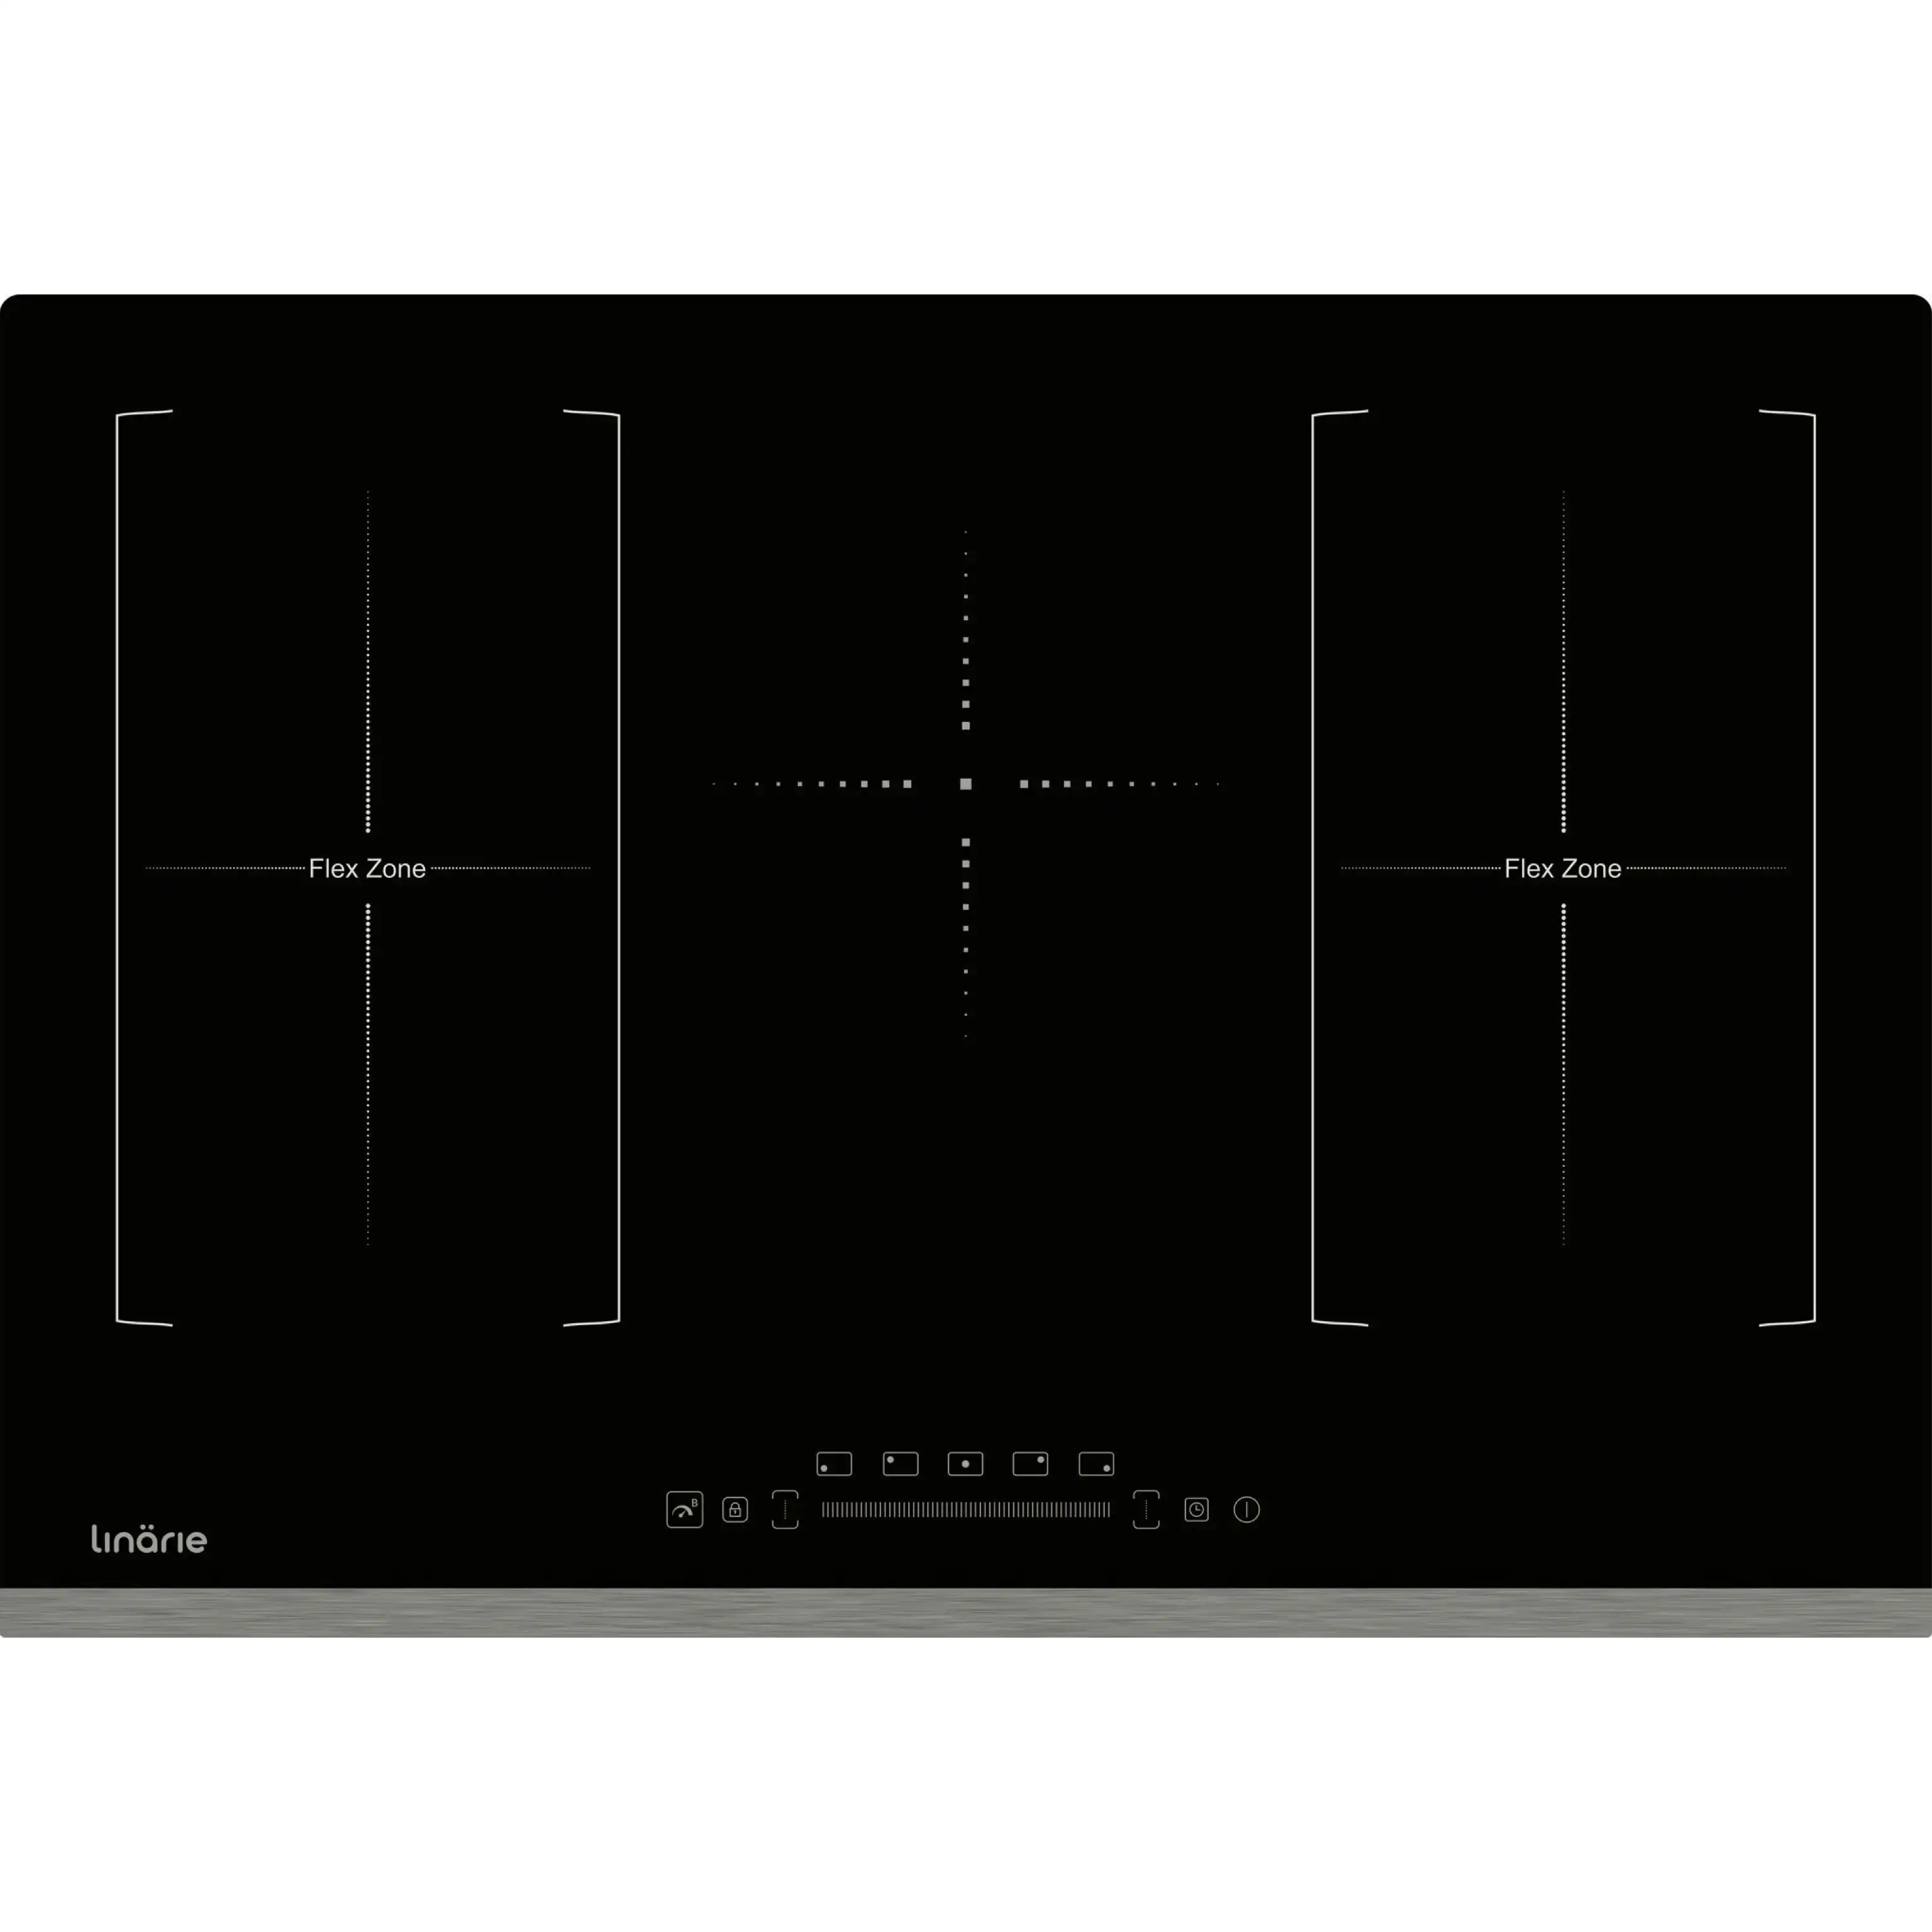 Linarie 77cm 4 Zone Induction Doube Flex Zone Cooktop